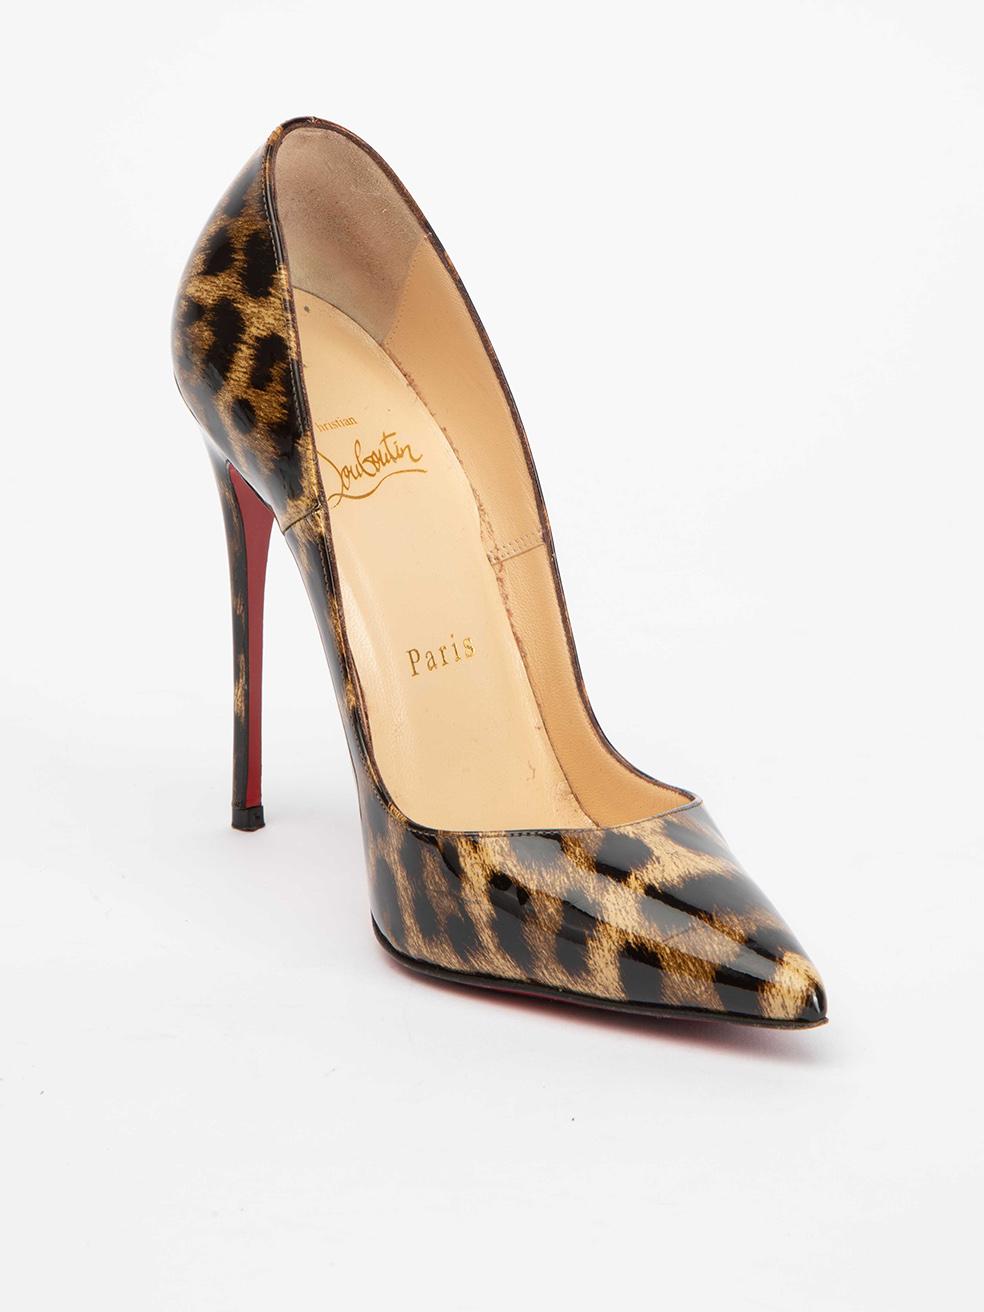 CONDITION is Very good. Hardly and wear to shoes is evident other than light wear to soles and heel tips on this used Christian Louboutin designer resale item. 
 
 Details
  Brown
 Patent leather
 Slip on heels
 Leopard print
 Pointed toe
 High